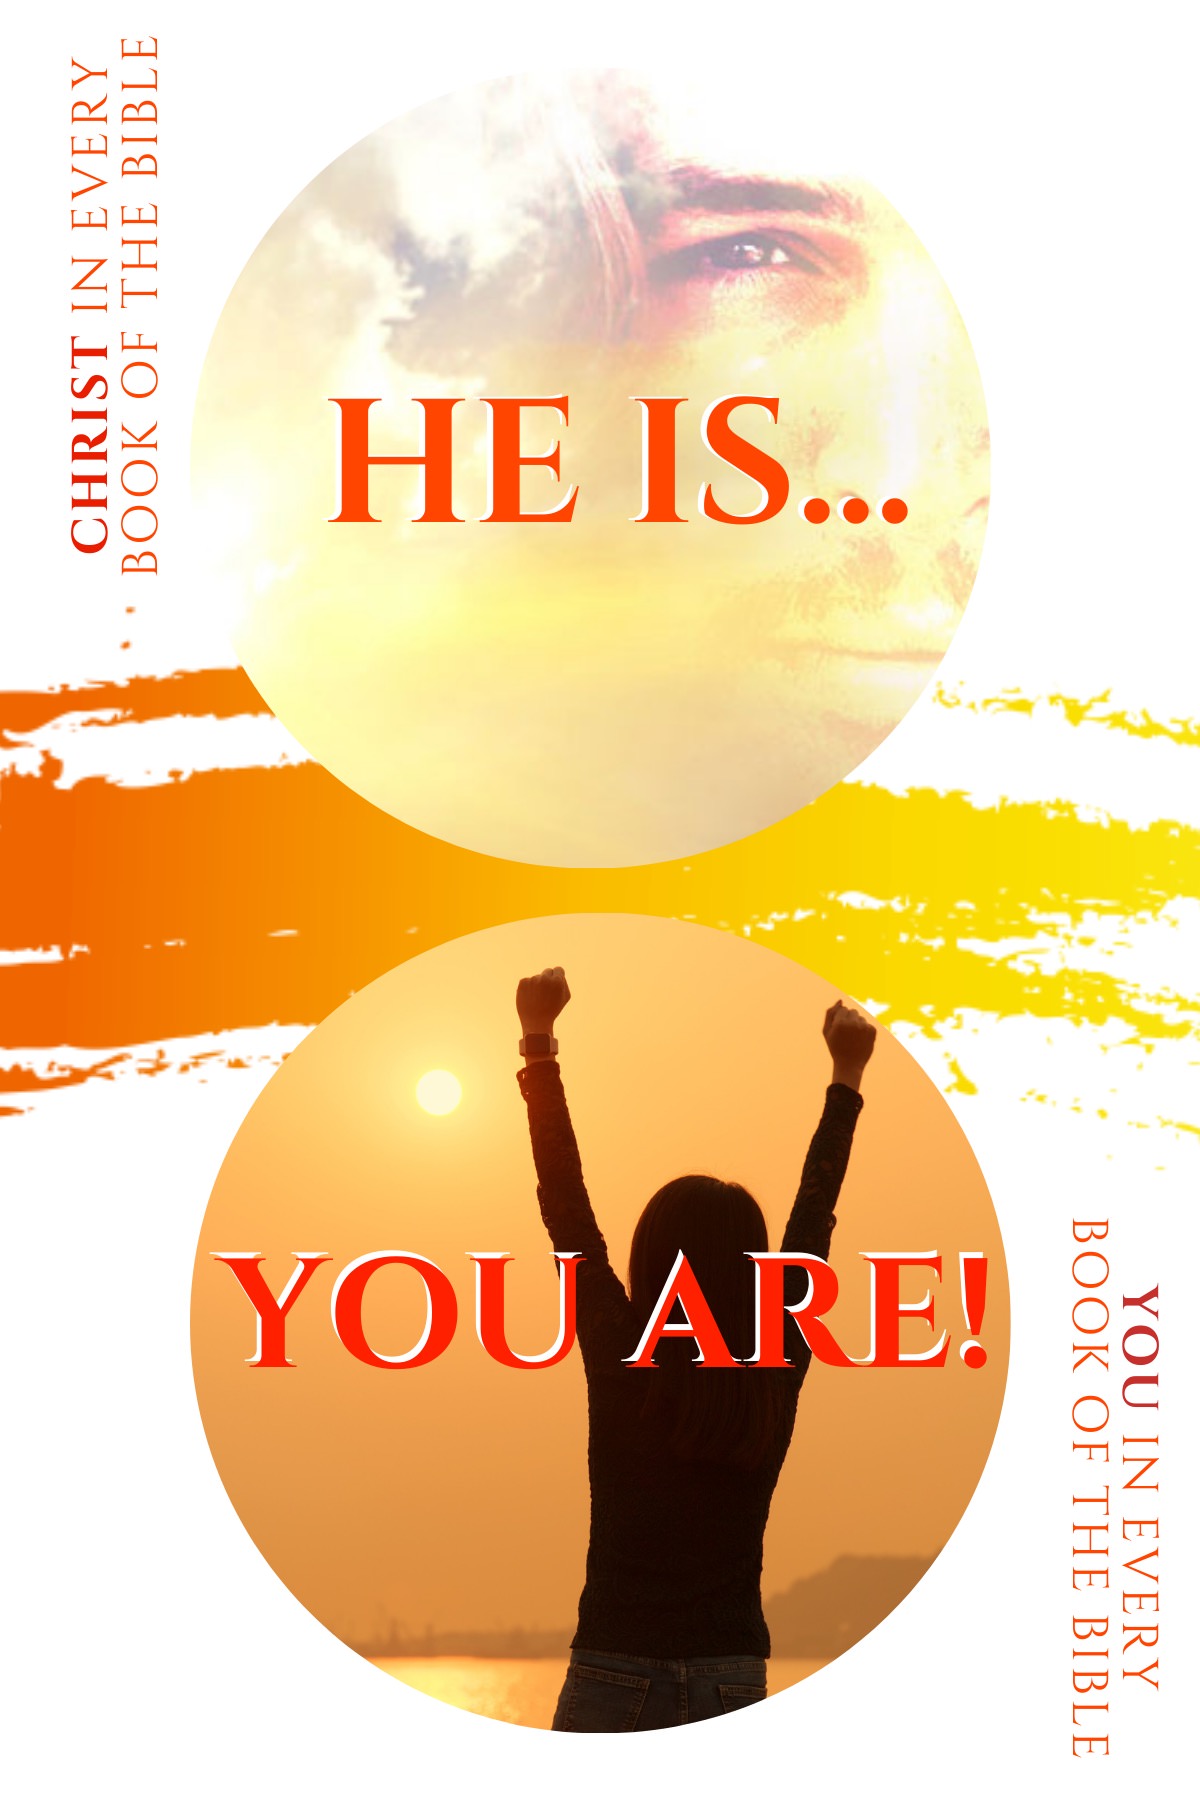 HE IS YOU ARE